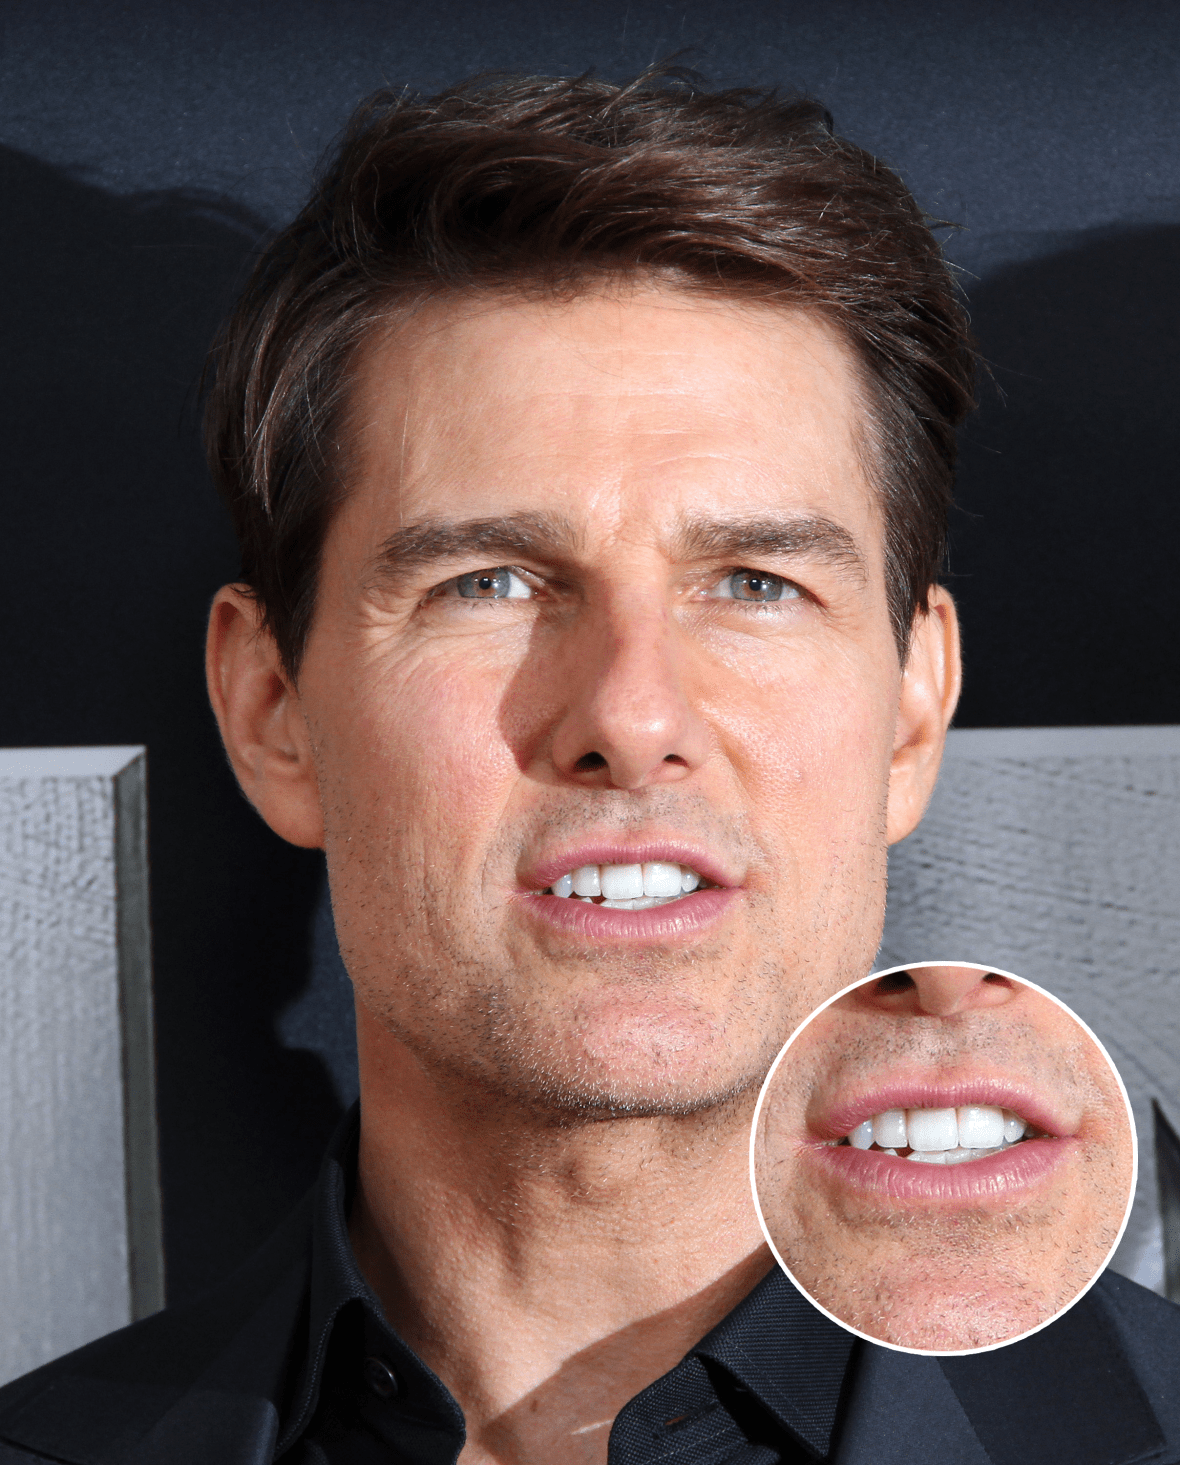 the tom cruise smile